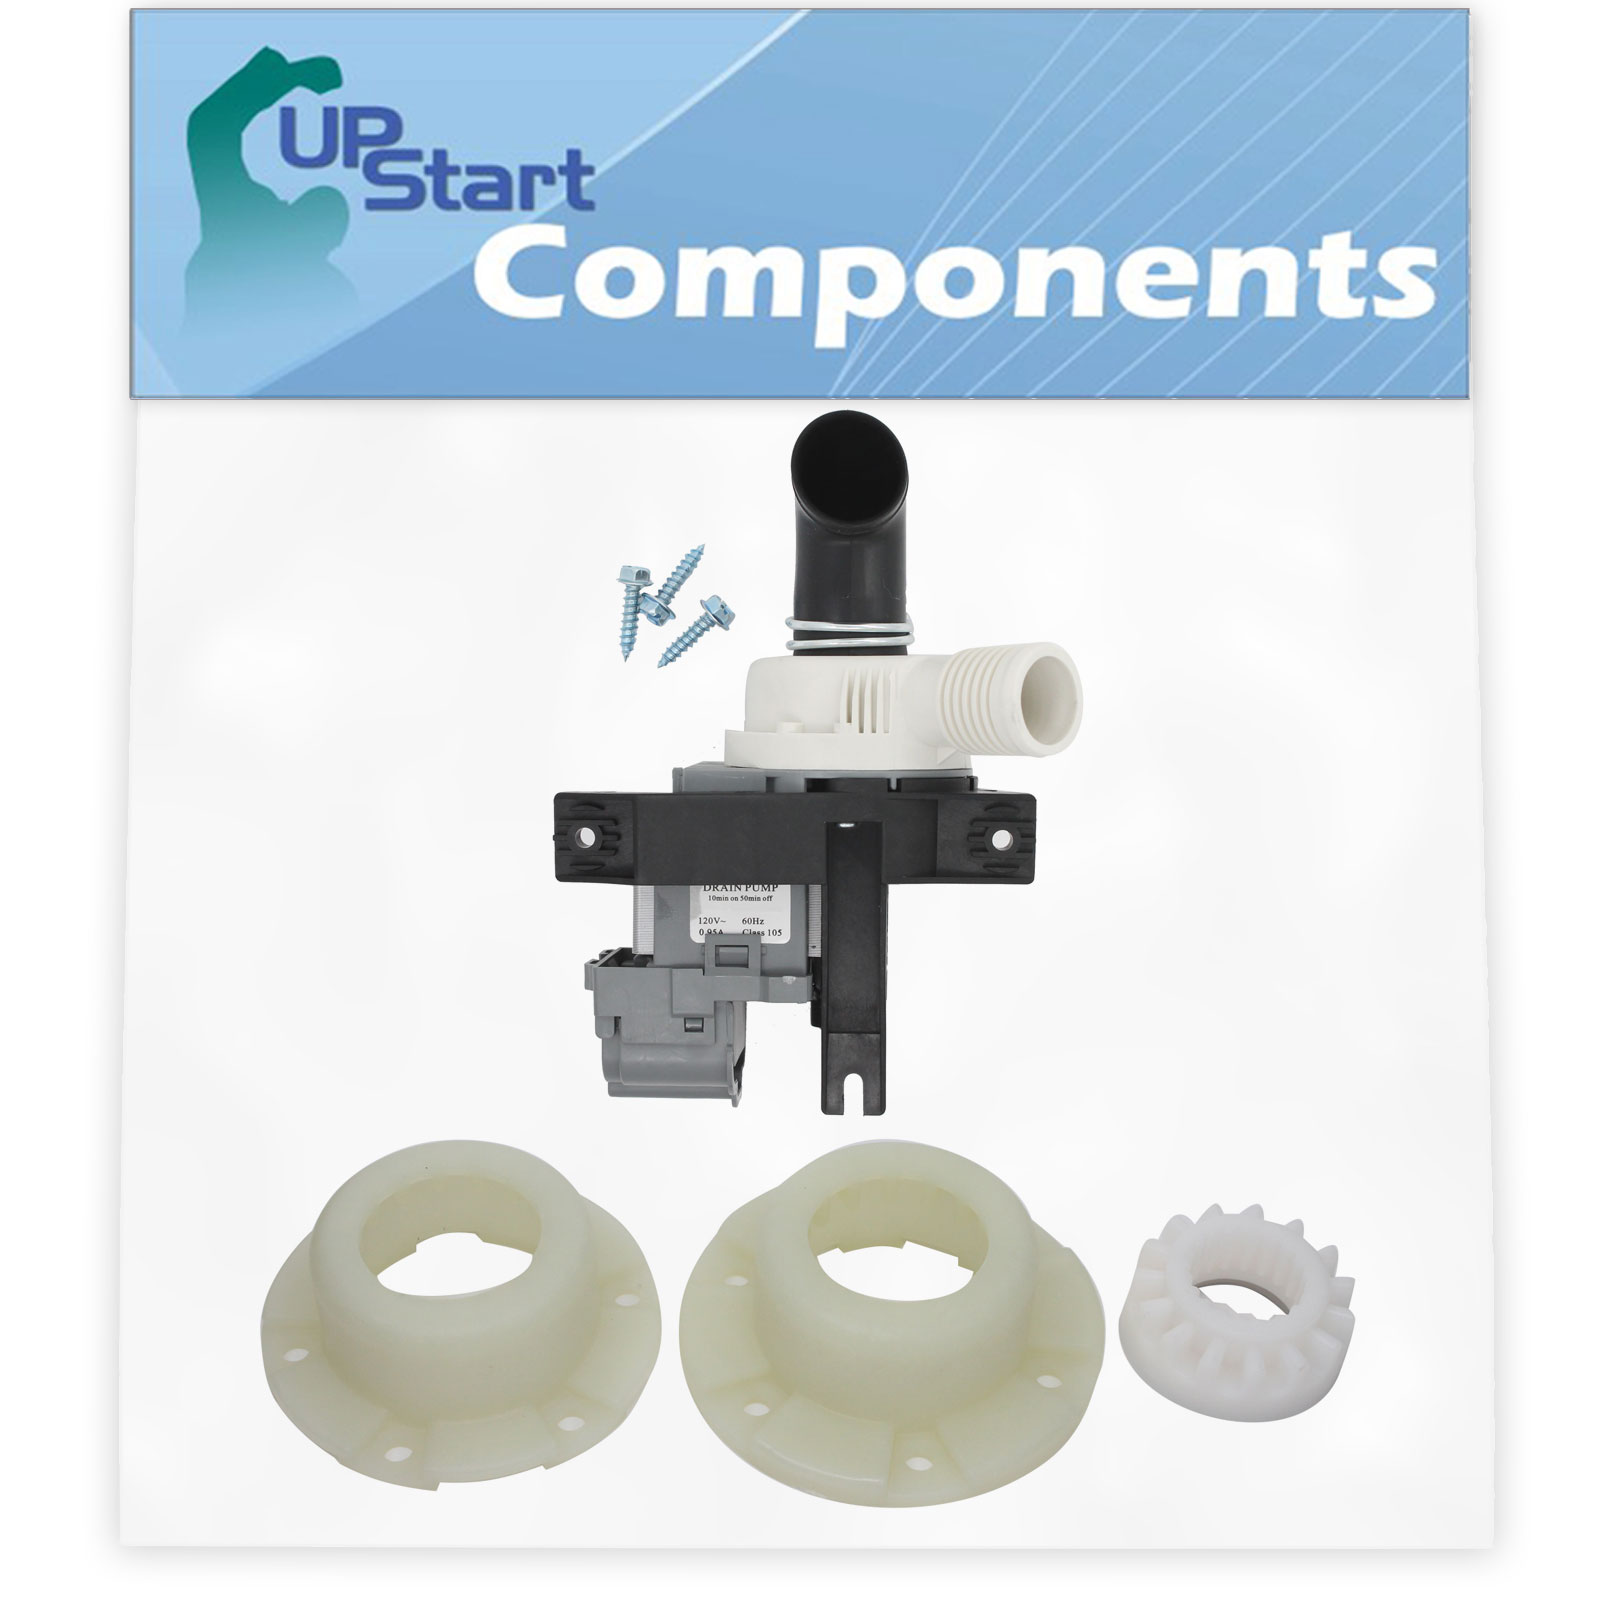 W10536347 Washer Drain Pump & 280145 Hub Kit Replacement for Whirlpool WTW7800XL0 Washing Machine - Compatible with W10217134 Water Pump & W10820039 Basket Hub Kit - UpStart Components Brand - image 1 of 4